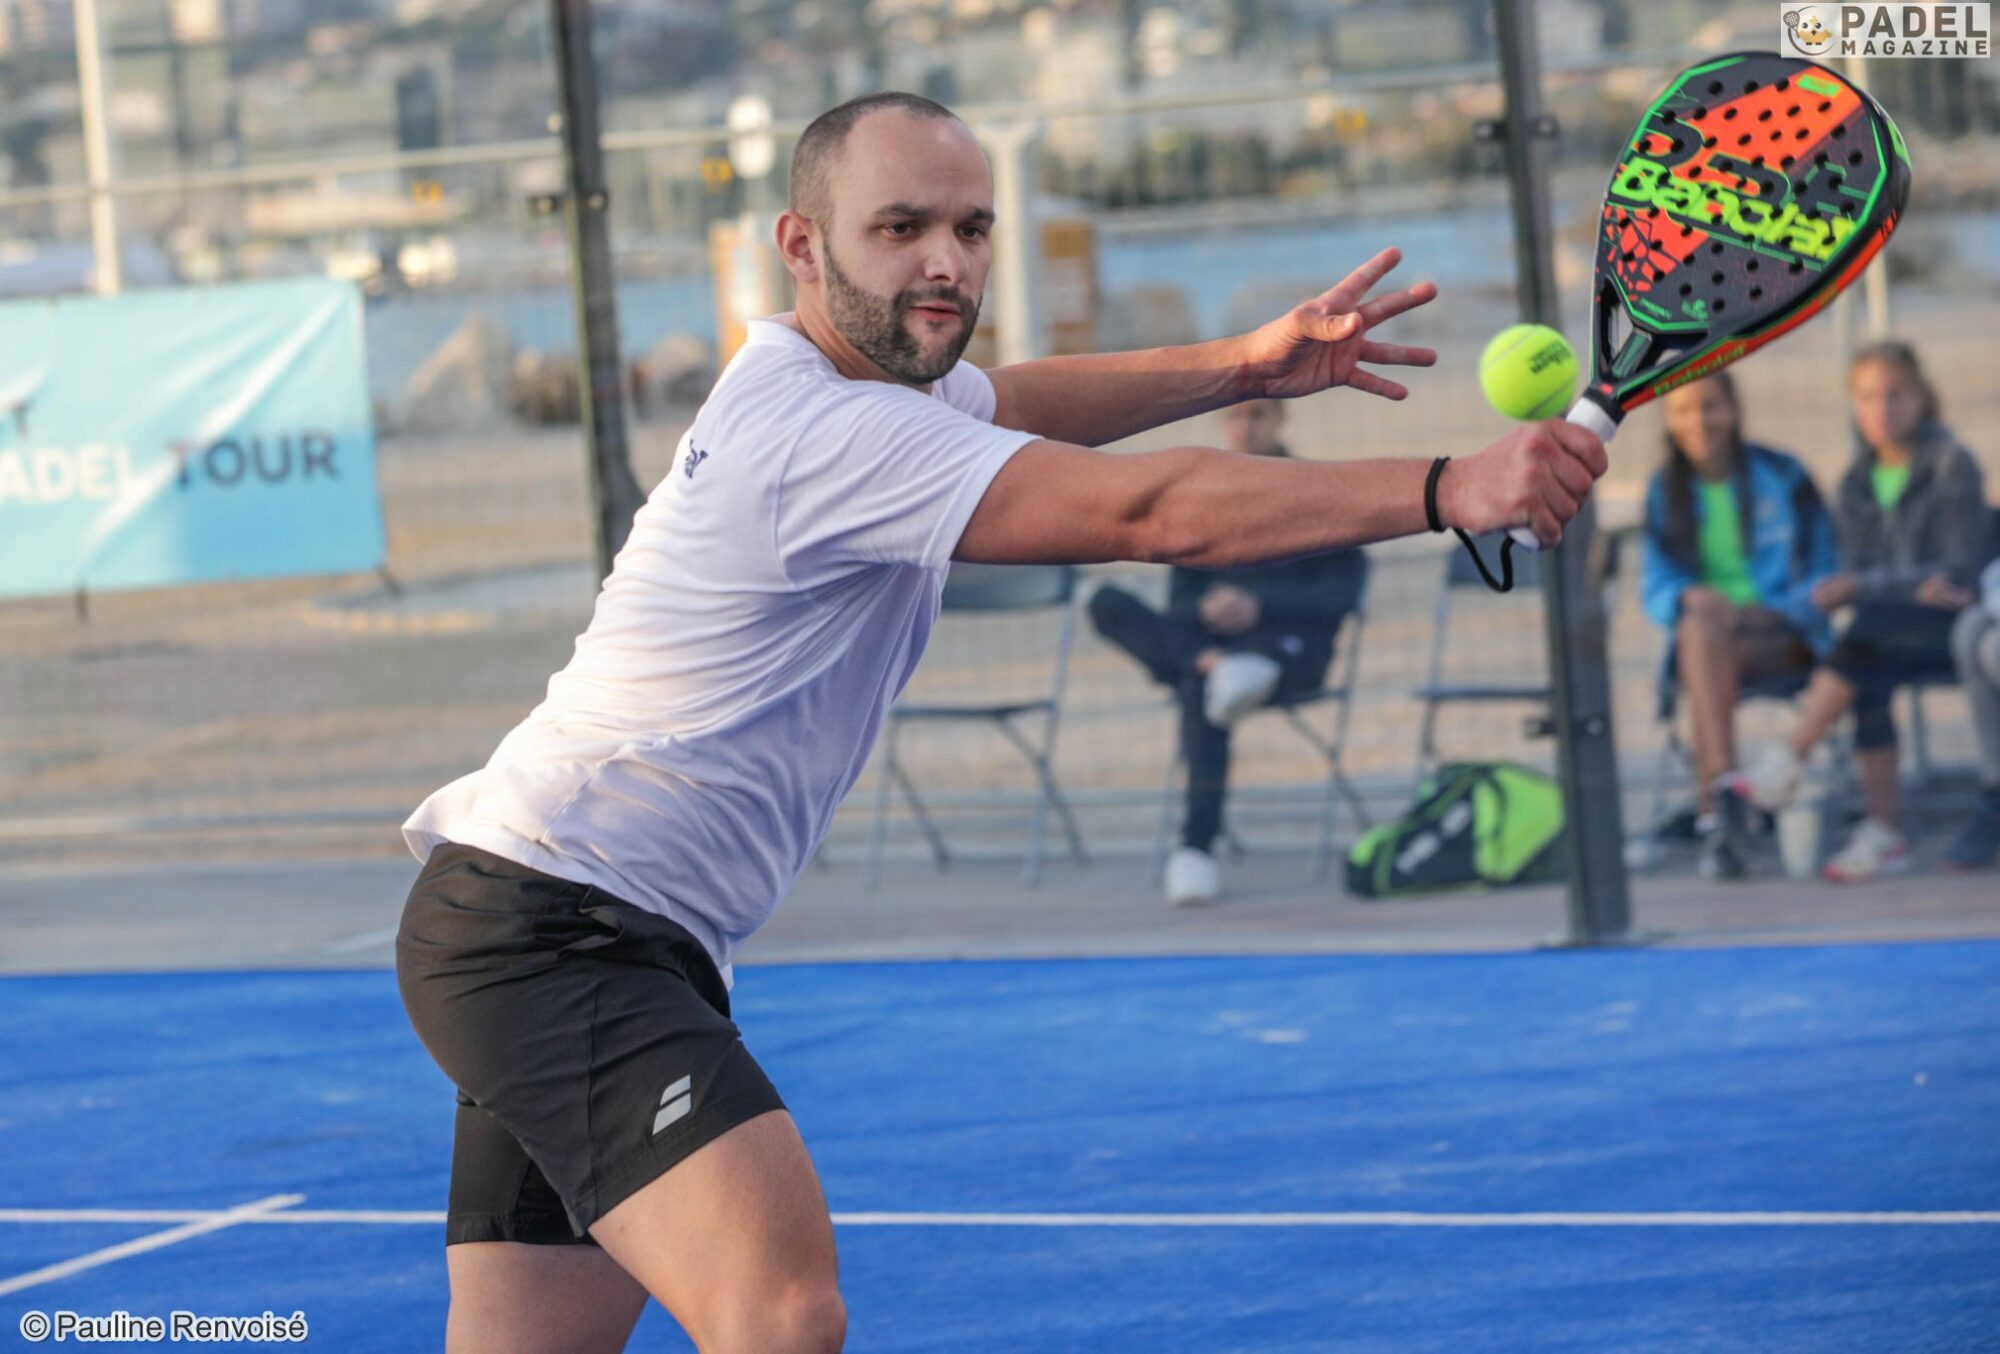 Program padel from the weekend of October 19 and 20, 2019